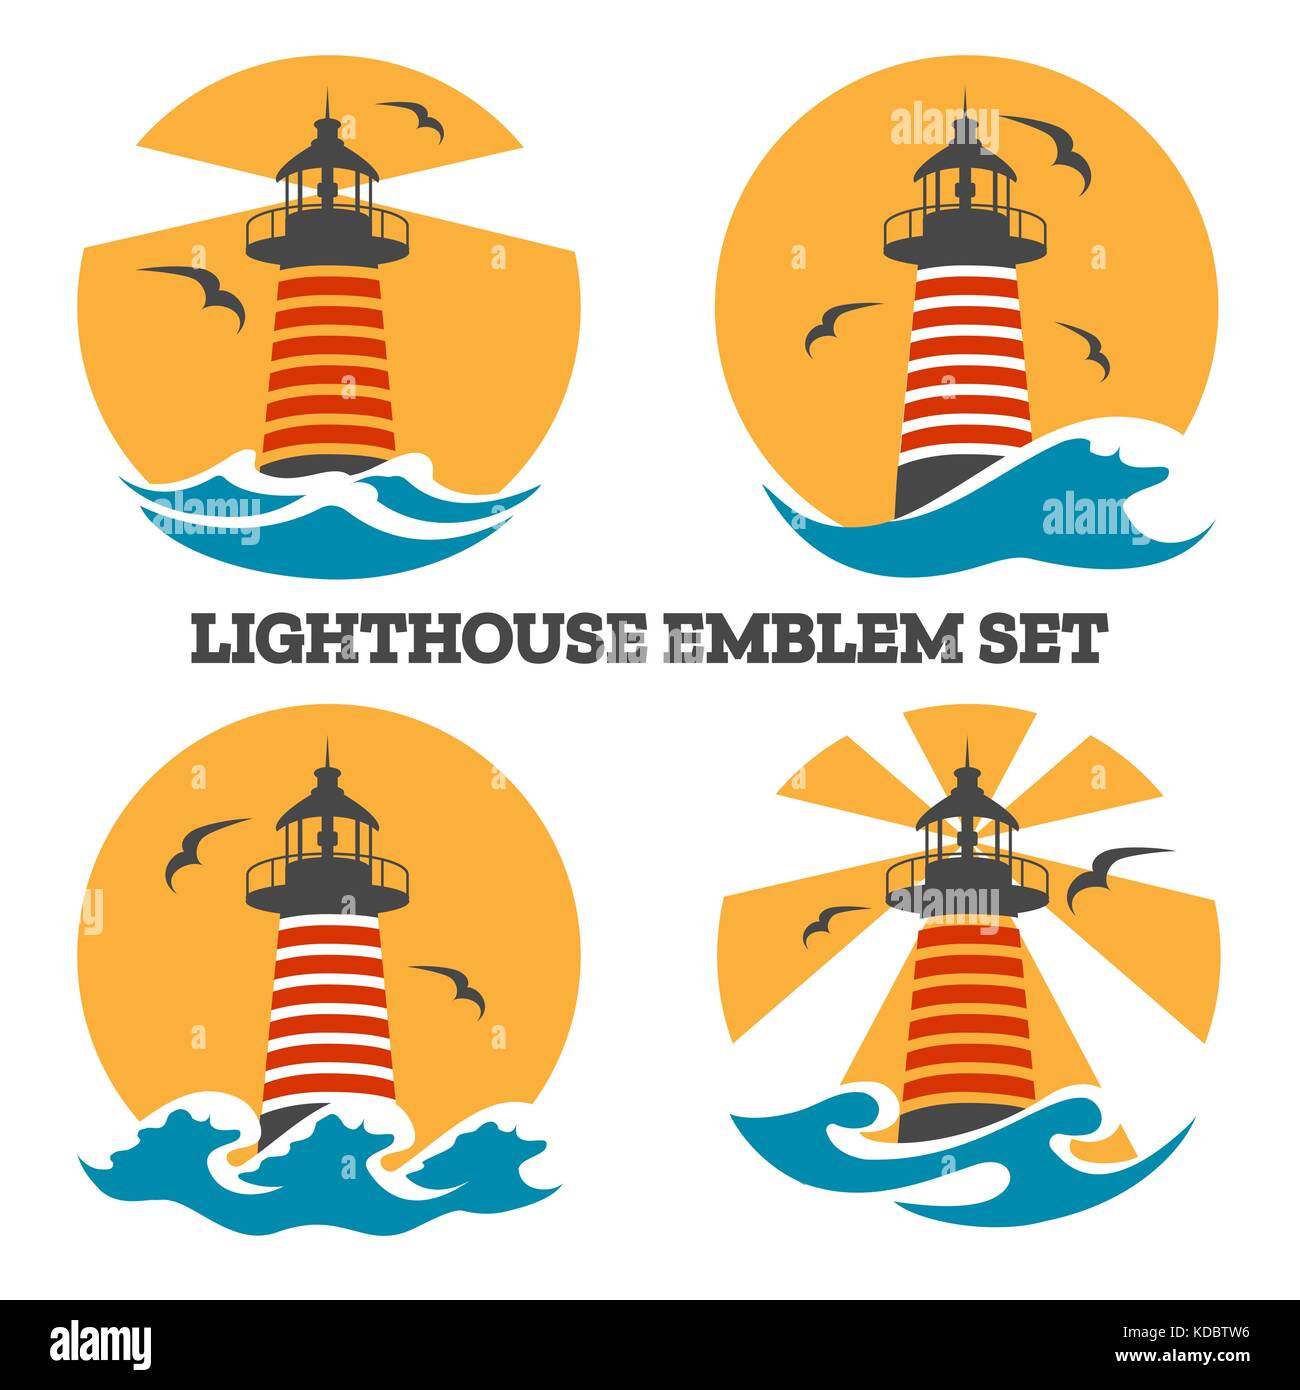 Colorful Lighthouse emblem set with ocean waves and seagulls. Vector illustration Stock Vector